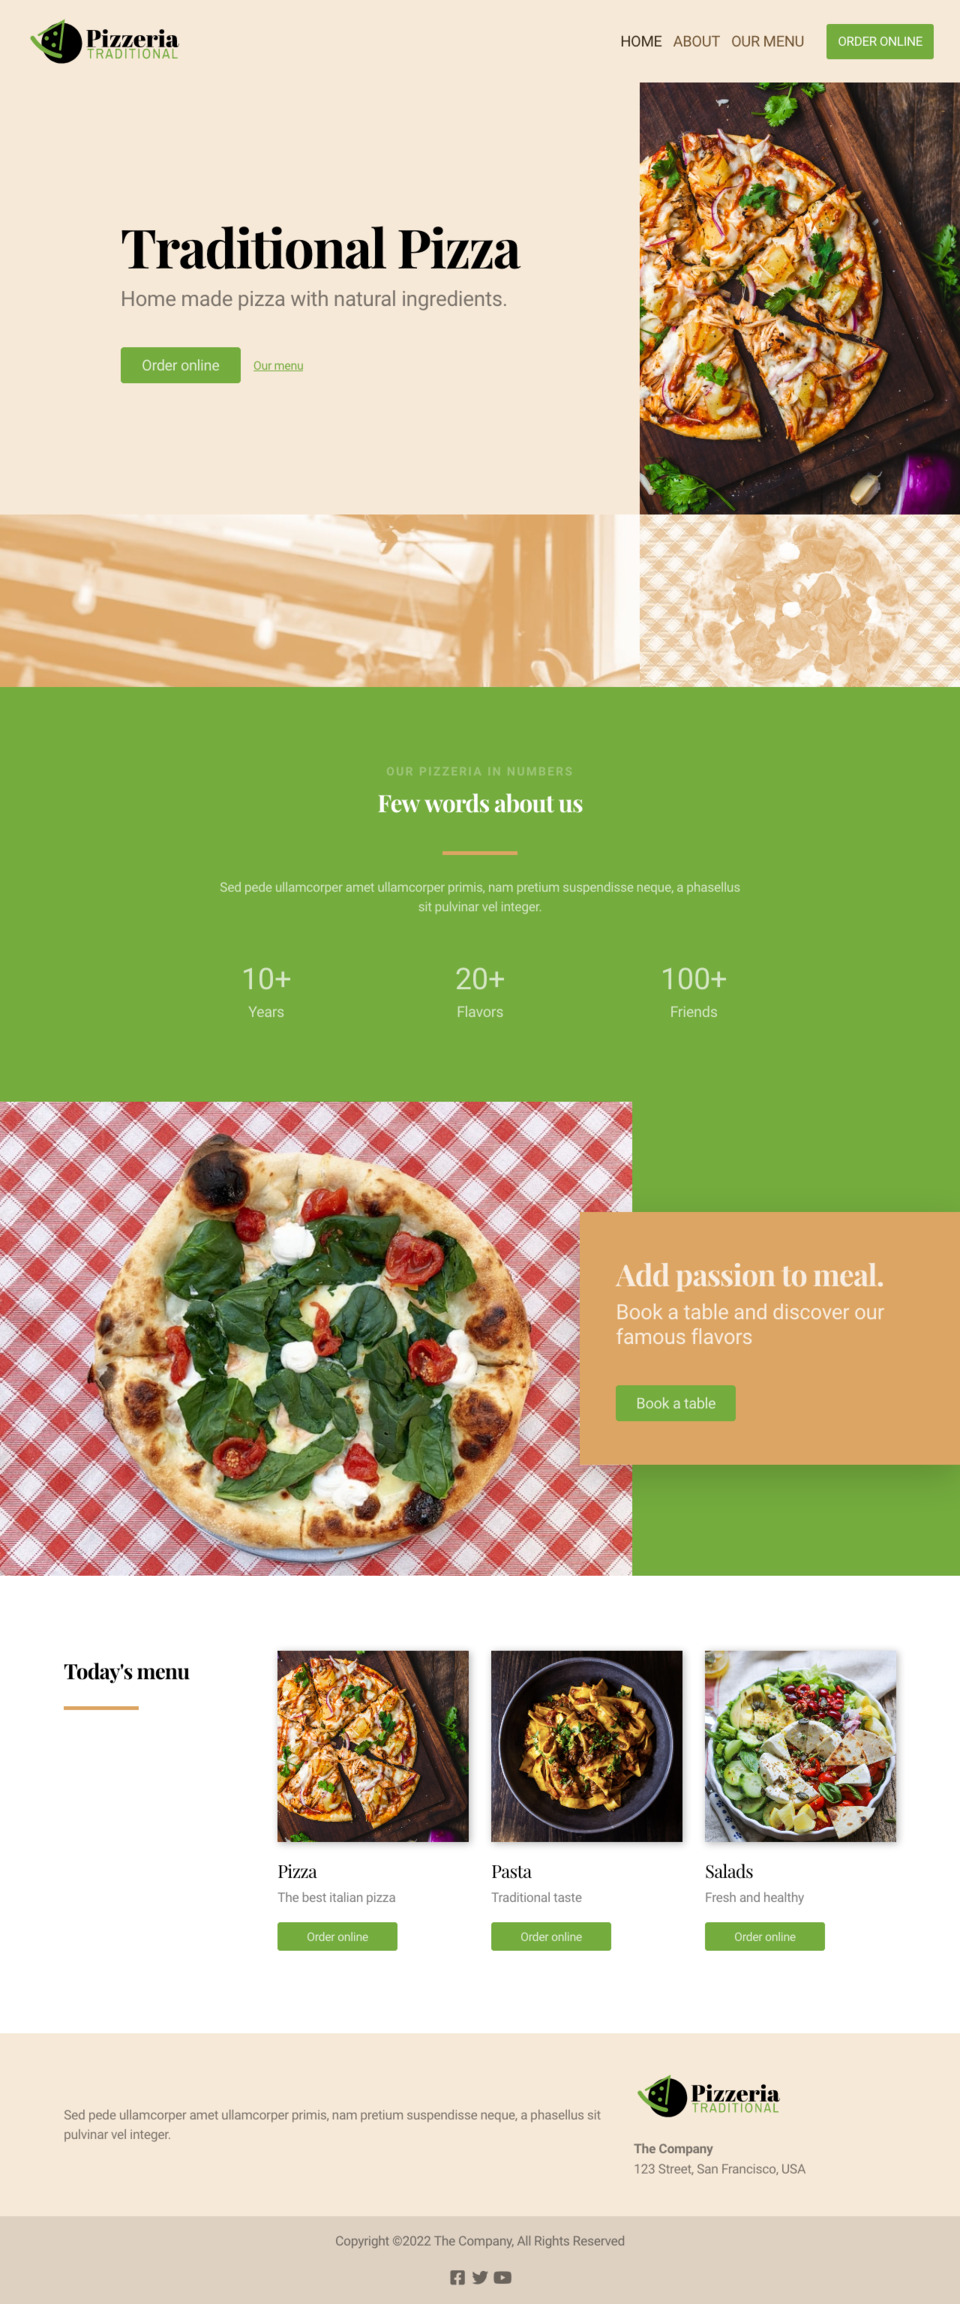 Pizzeria Website Template - Ideal for Italian restaurants, pizzerias, diners, and food establishments looking for a visually appealing website.